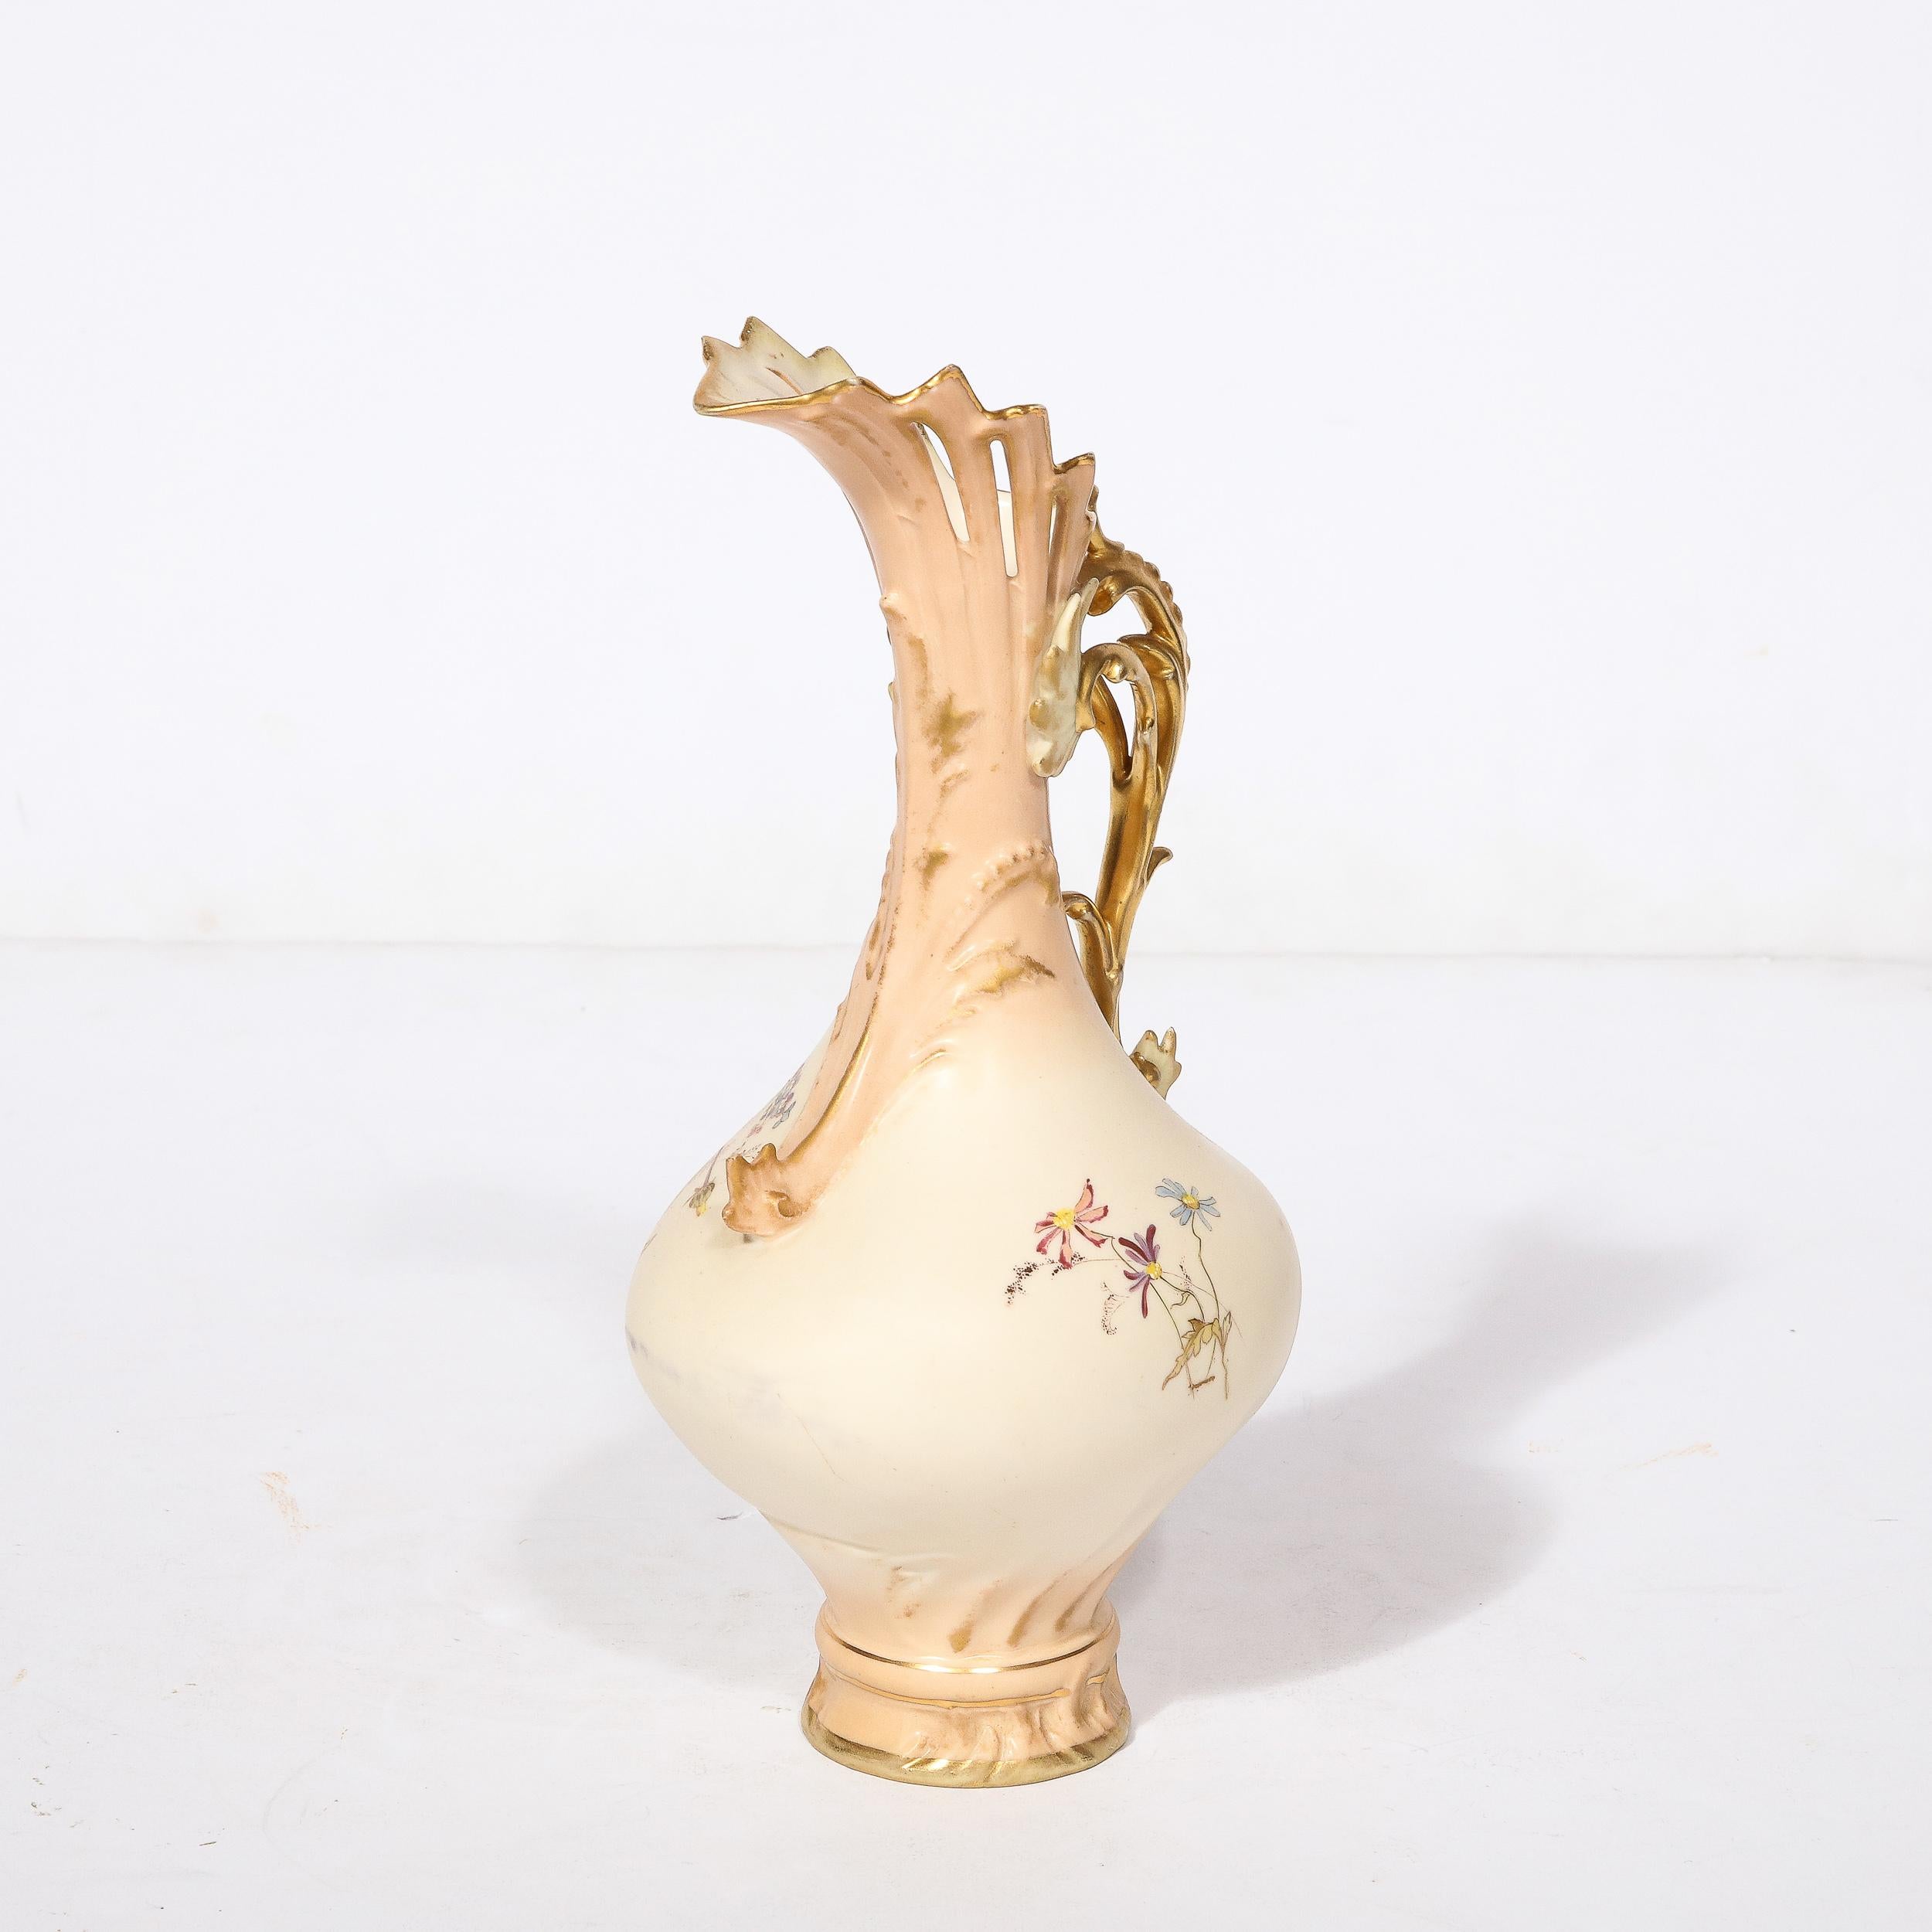 Hand-Painted Antique Hand Painted Neoclassical Porcelain Vase by A. Stowell Boston For Sale